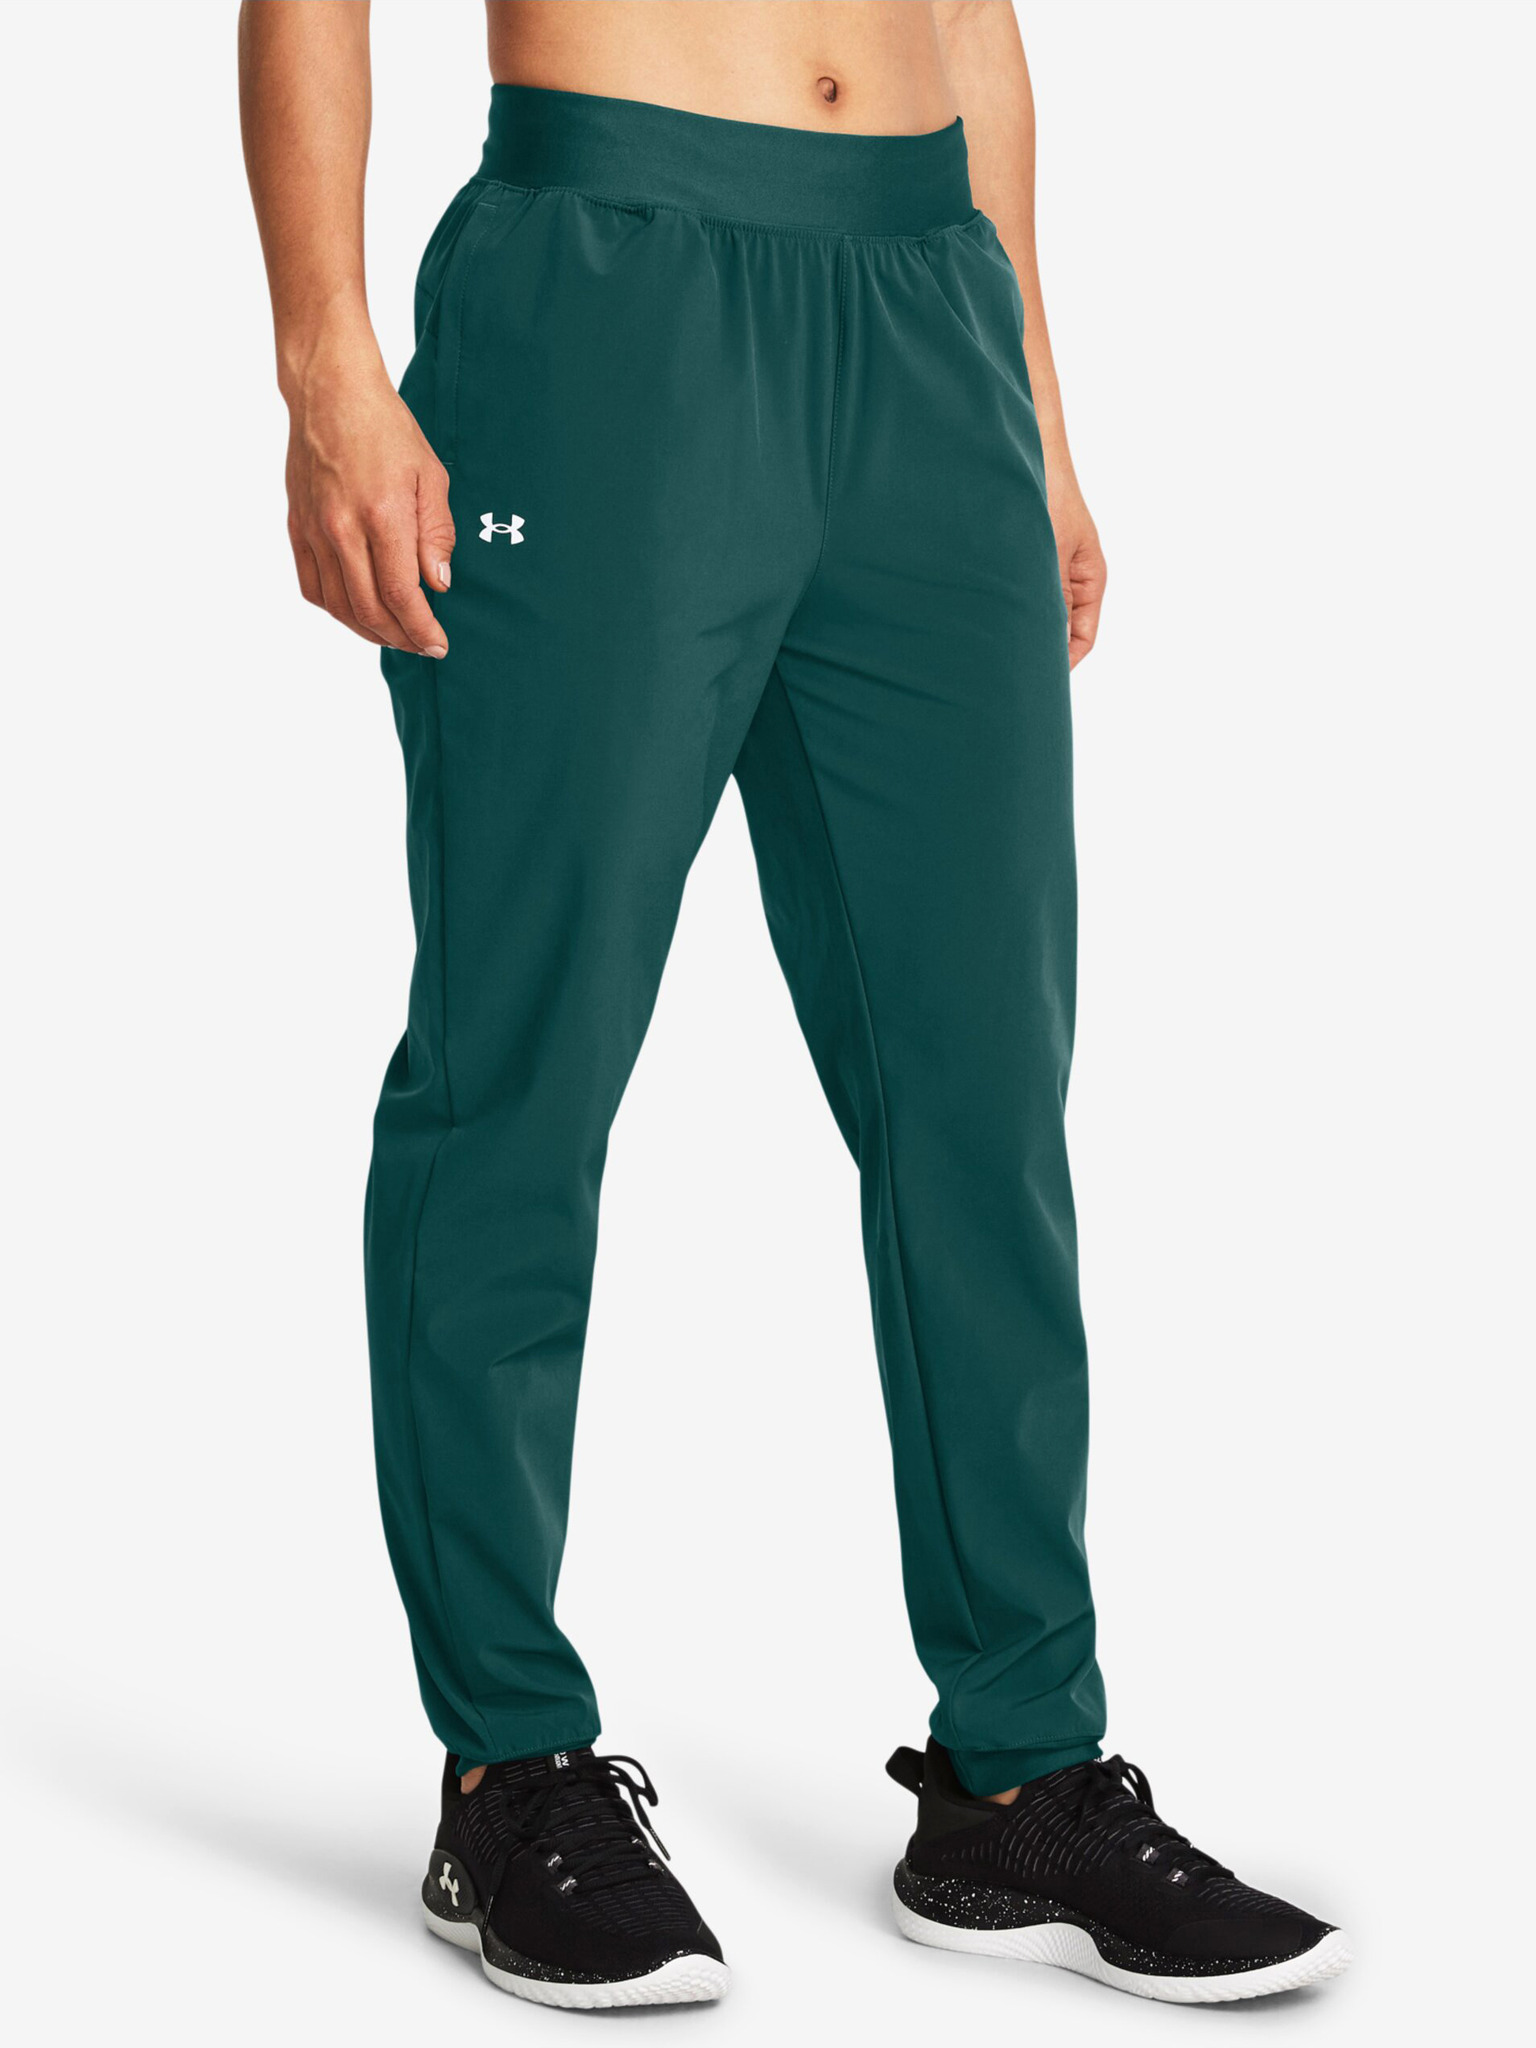 ArmourSport High Rise Wvn Pnt Kalhoty Under Armour